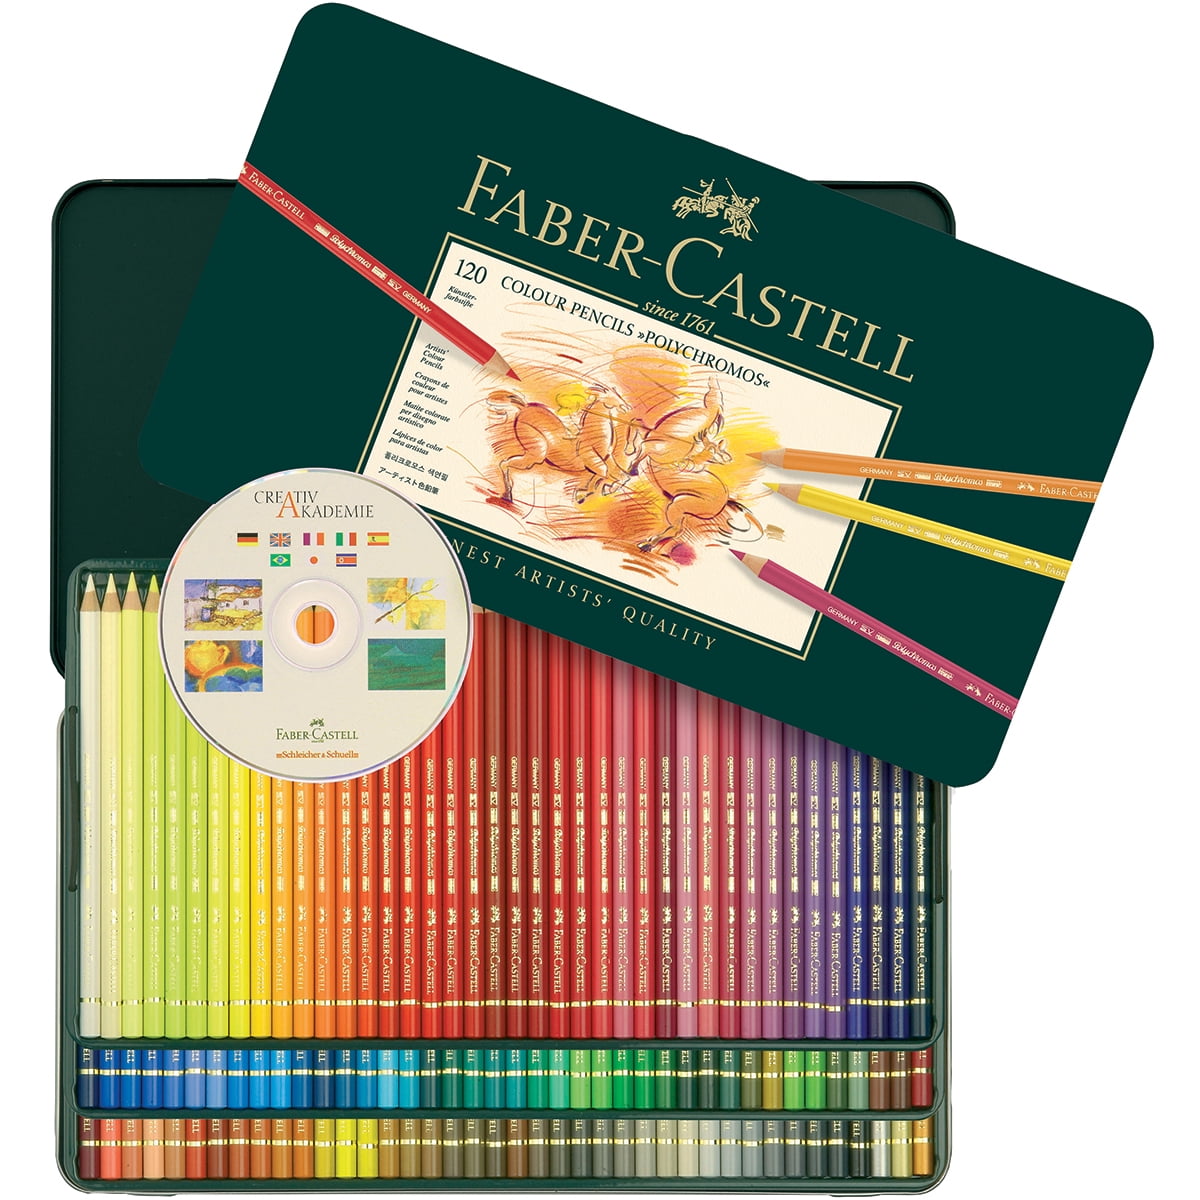 Unboxing the 120 Faber-Castell Polychromos Colored Pencils